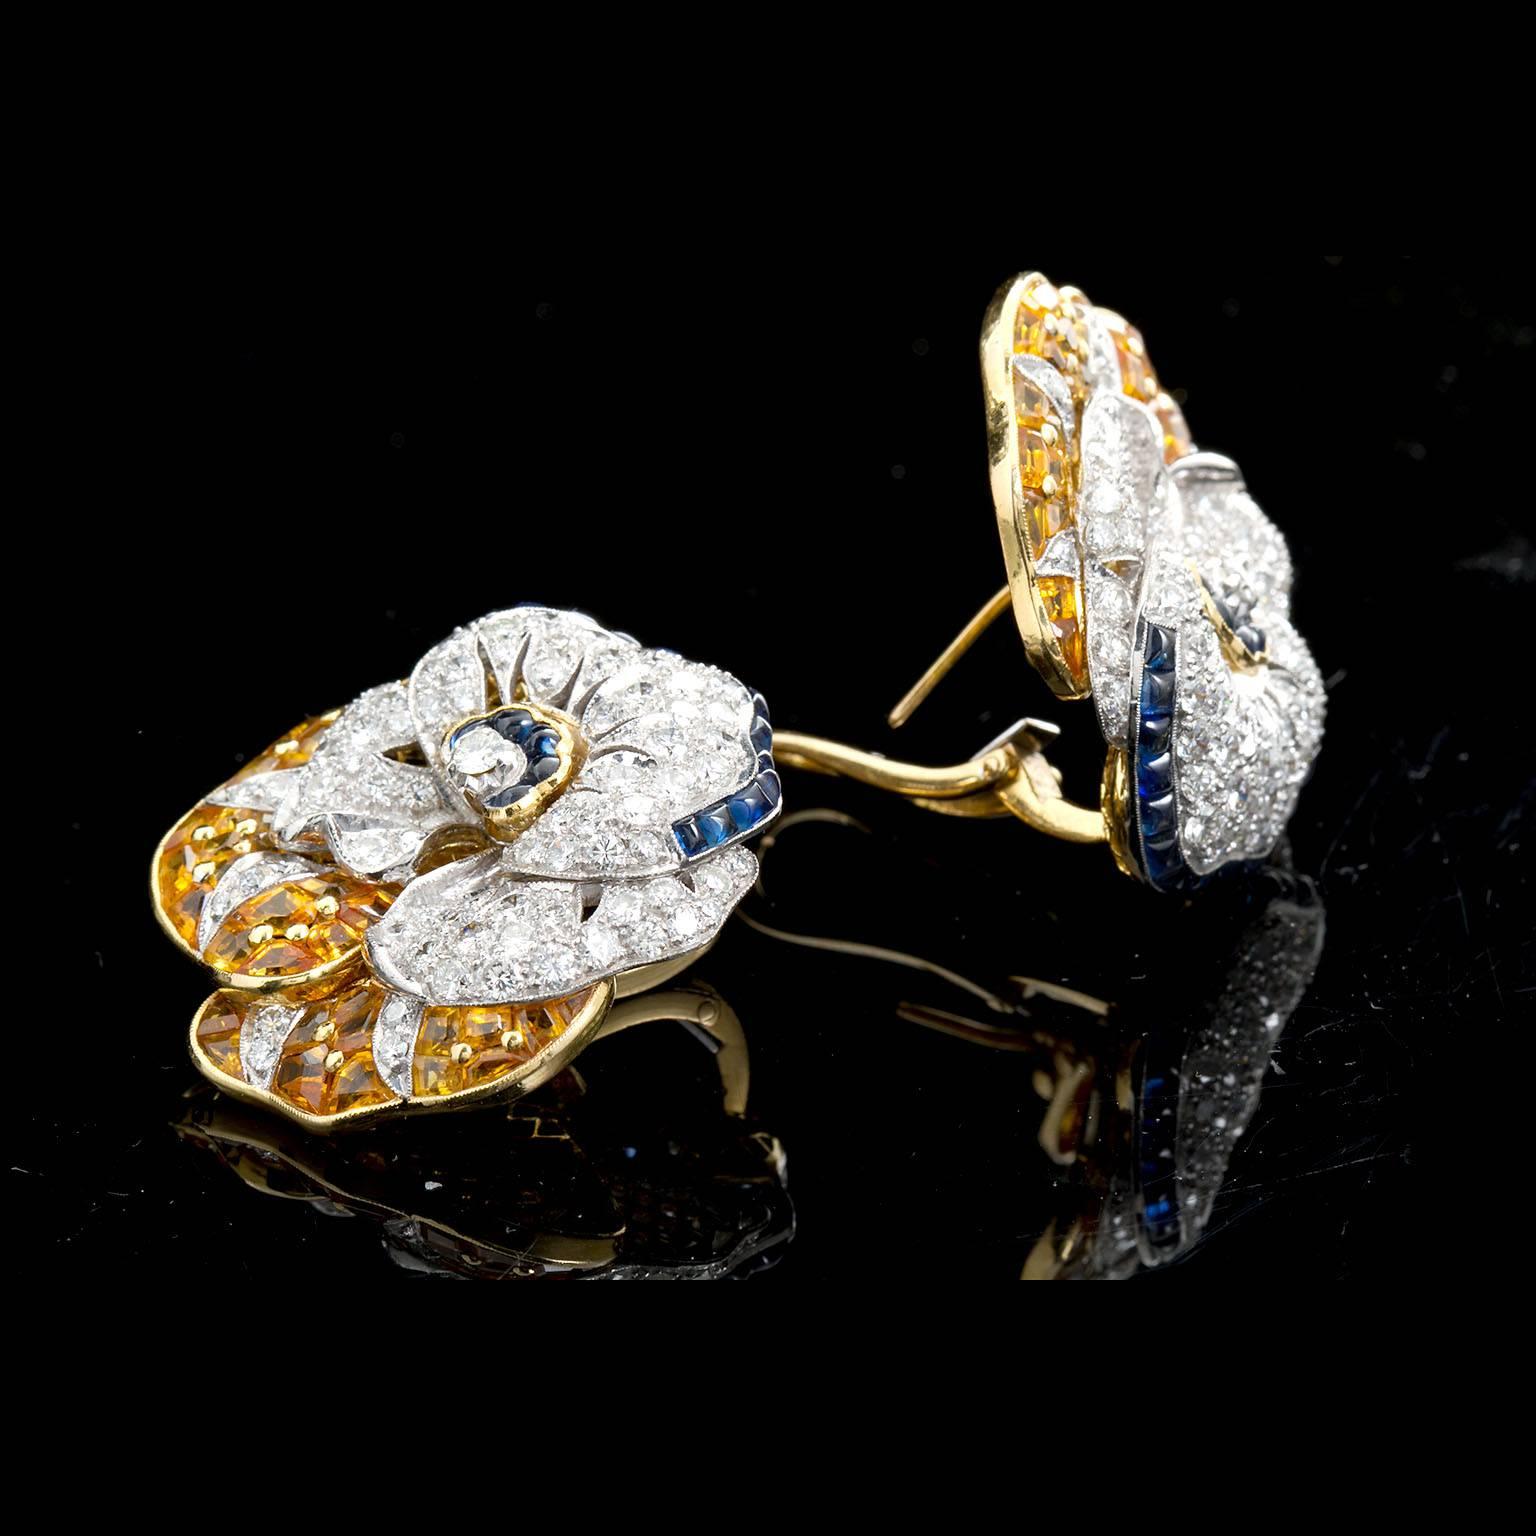 A pair of the famous pansy style earrings by Oscar Heyman. Set with round brilliant cut diamonds, sugarloaf style calibrated blue sapphires and calibrated step-cut faceted yellow sapphires in a hand crafted and stylized 18 karat yellow and white